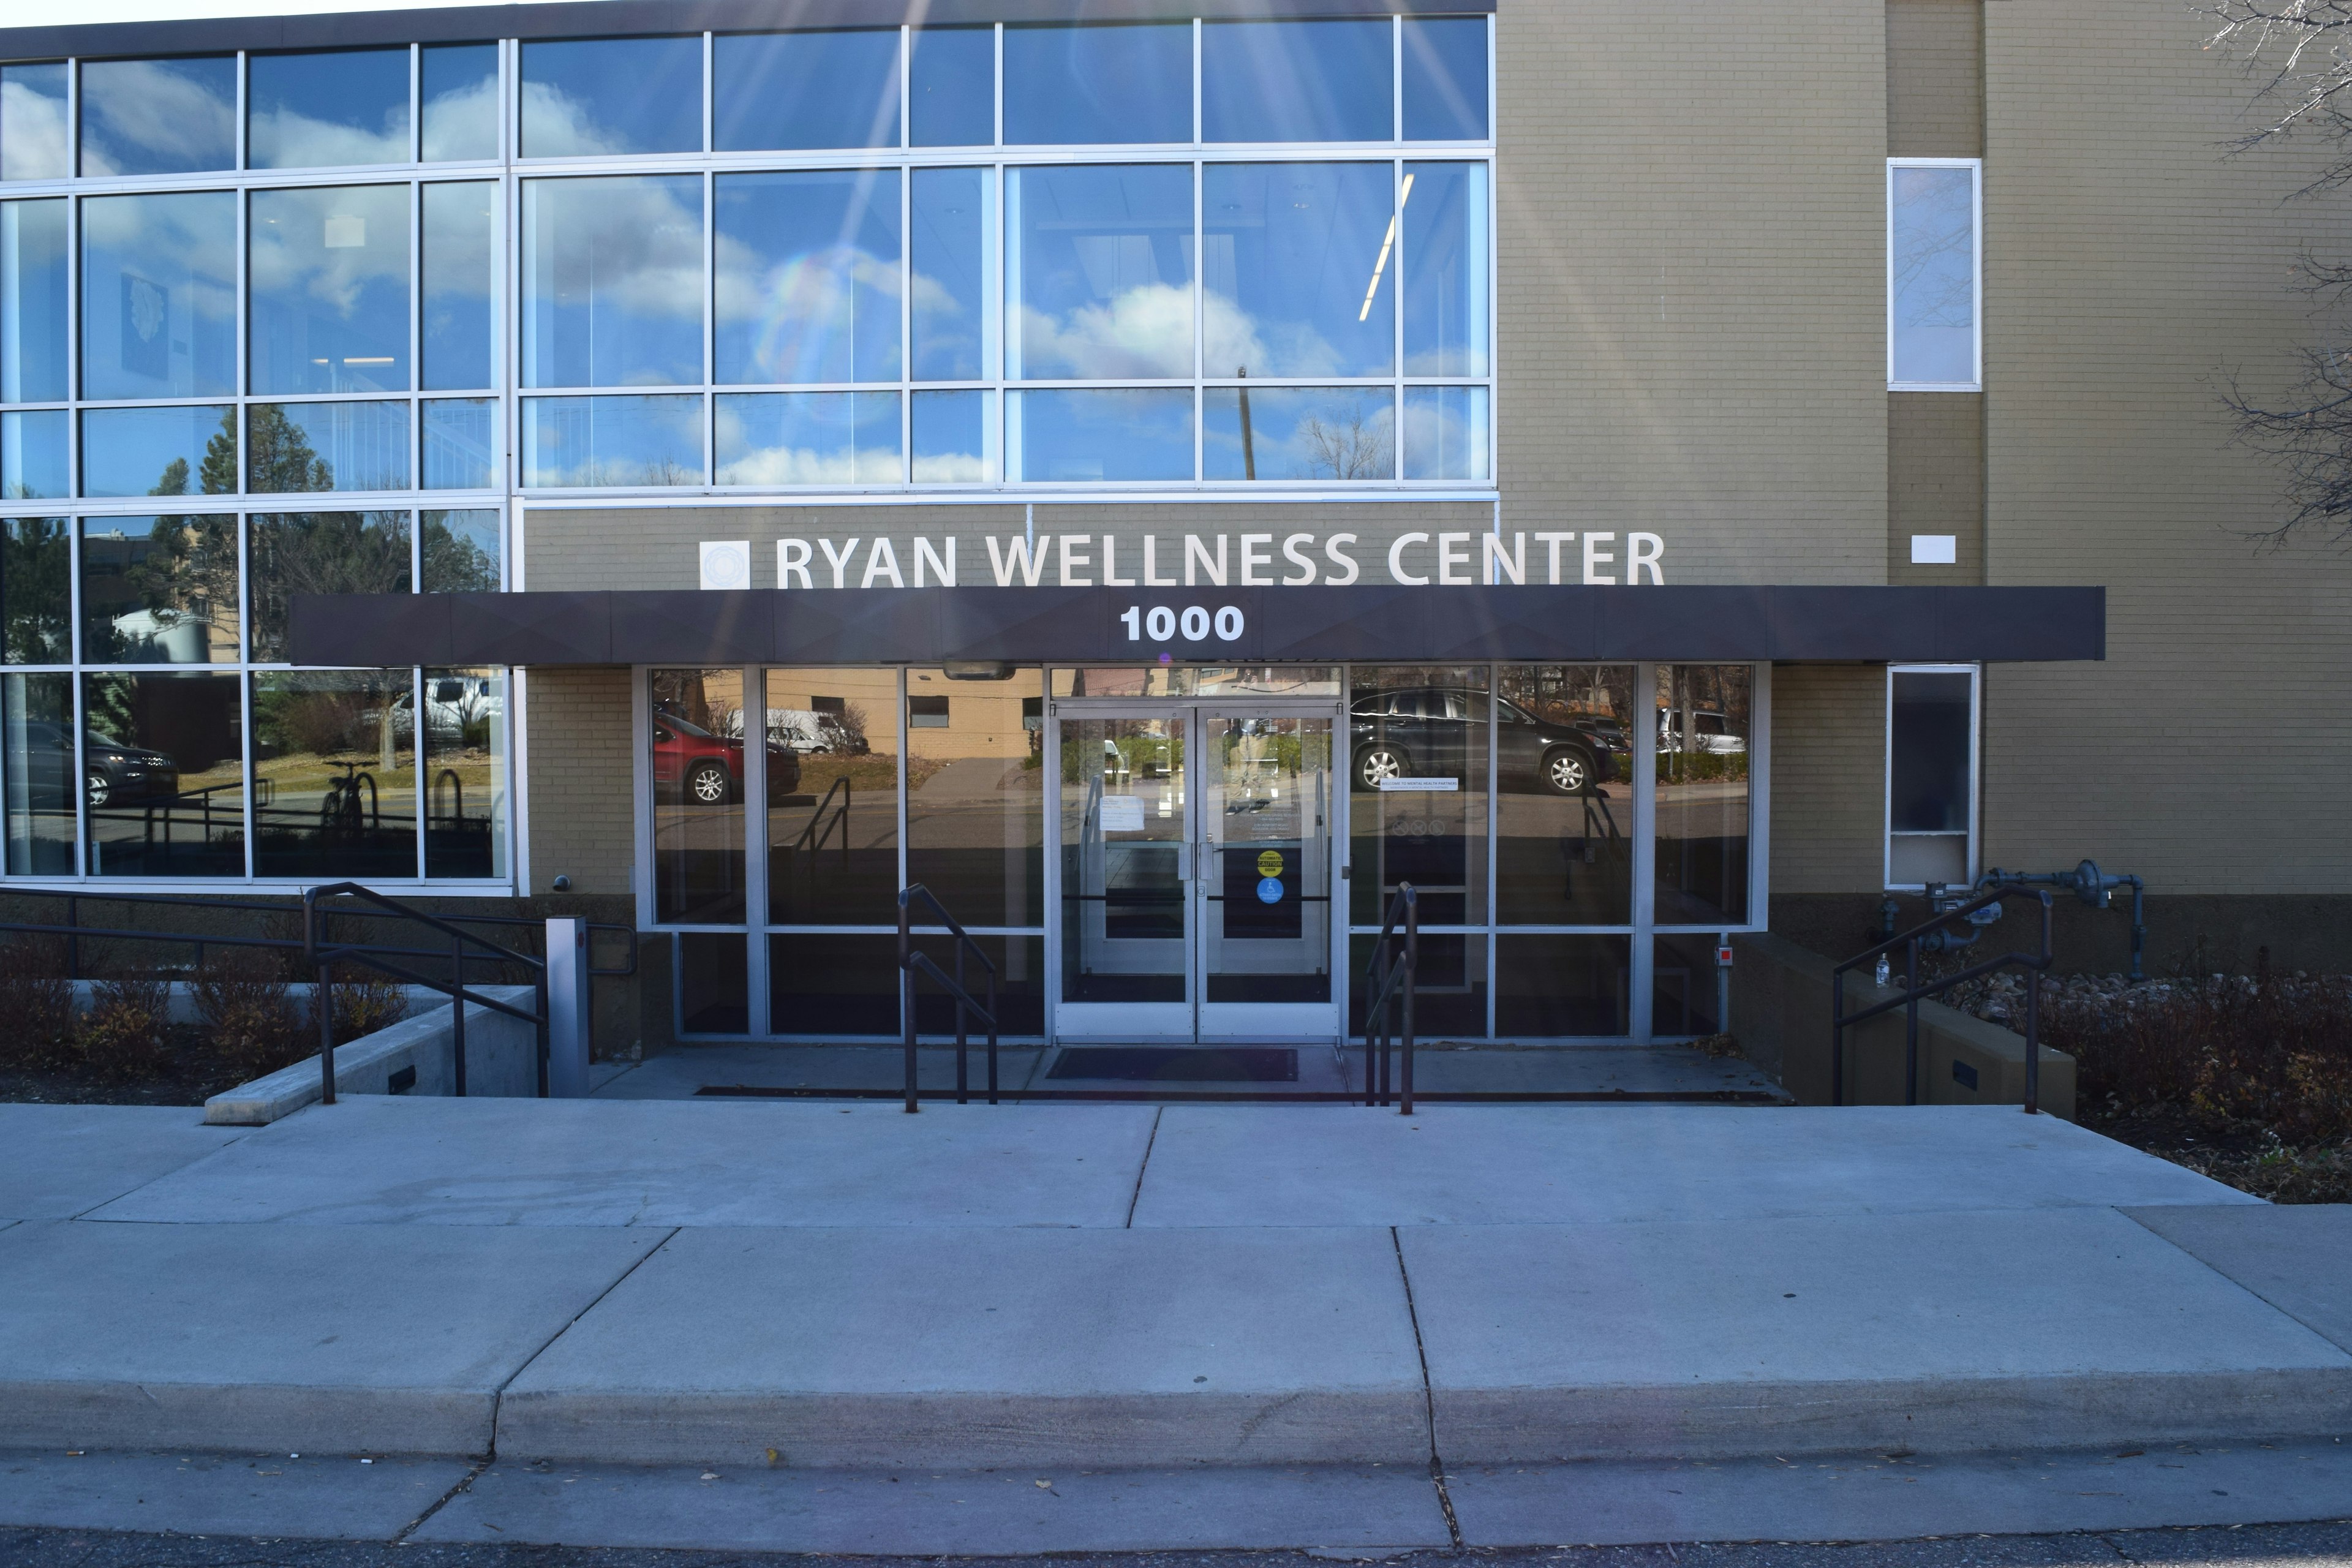 Ryan Wellness Center (rwc) Office Outside. Large wall of windows, tan brick, and lettering that reads "Ryan Wellness Center, 1000"